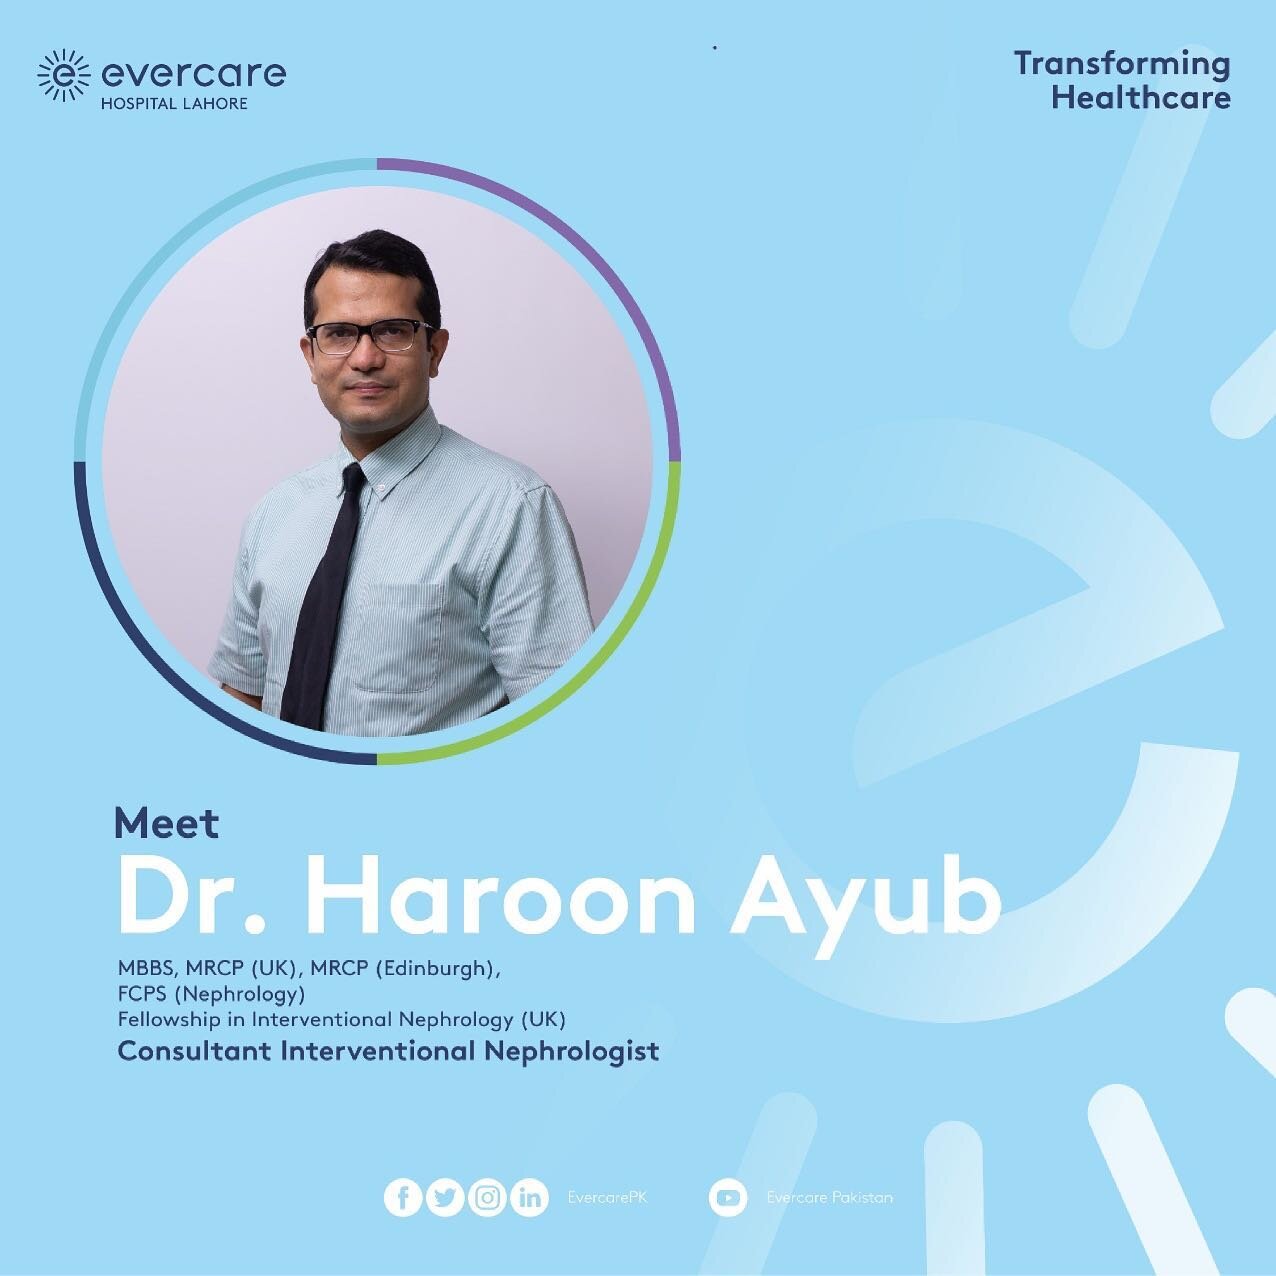 Meet Dr Haroon Ayub who works as a Consultant Interventional Nephrologist. Dr. Ayub has graduated from King Edward Medical University, he received his training both in Pakistan and UK. #TransformingHealthcare #EvercareHospitalLahore